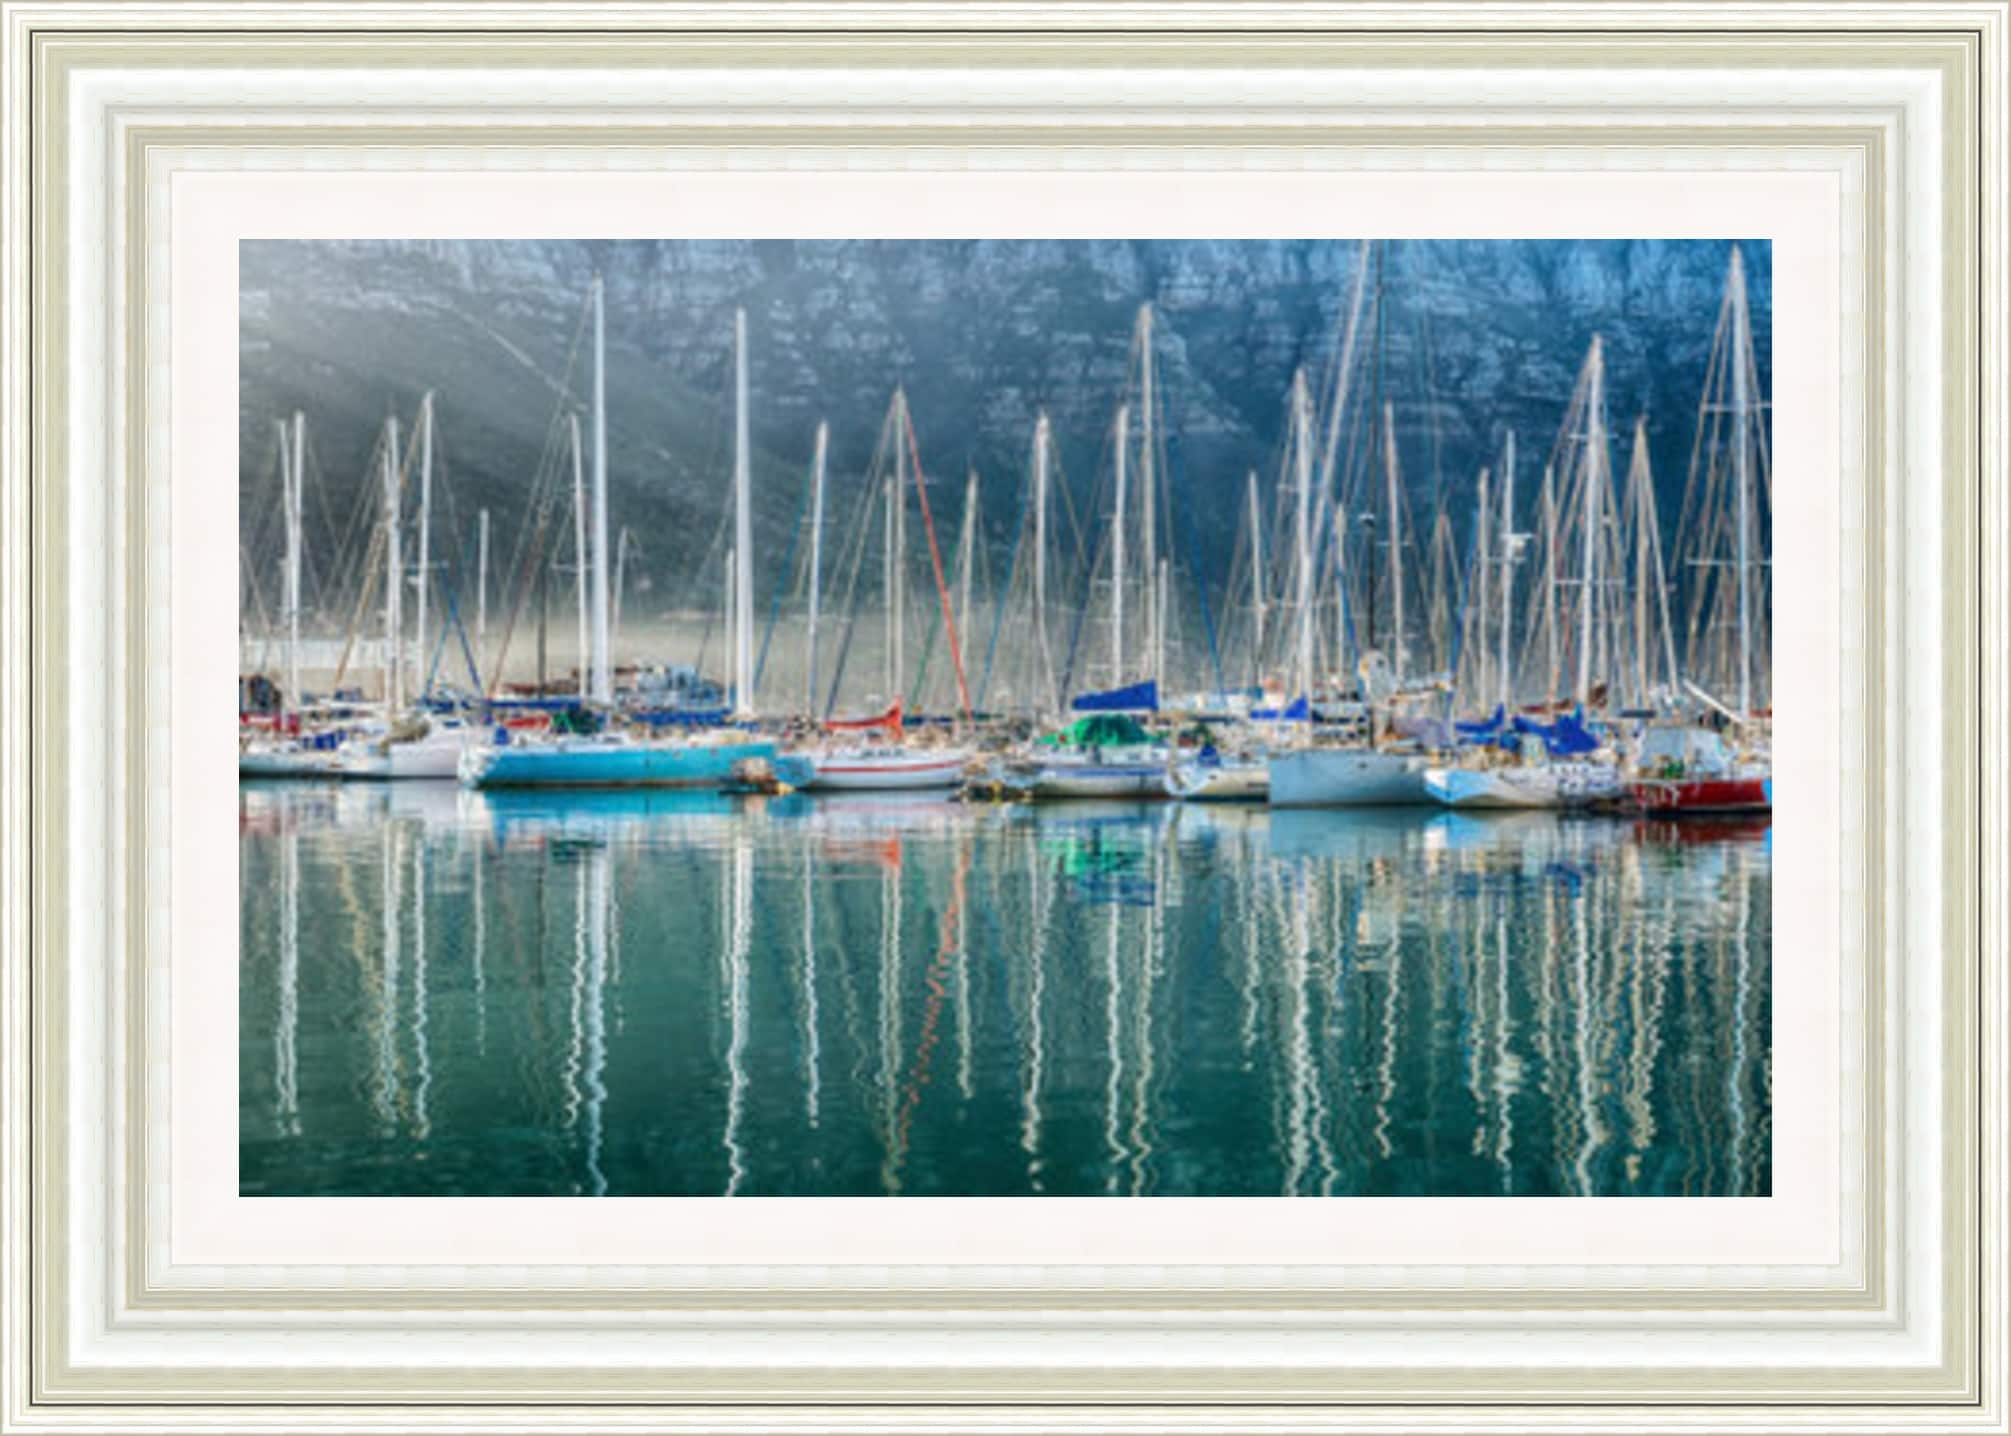 Hout Bay Harbour 1